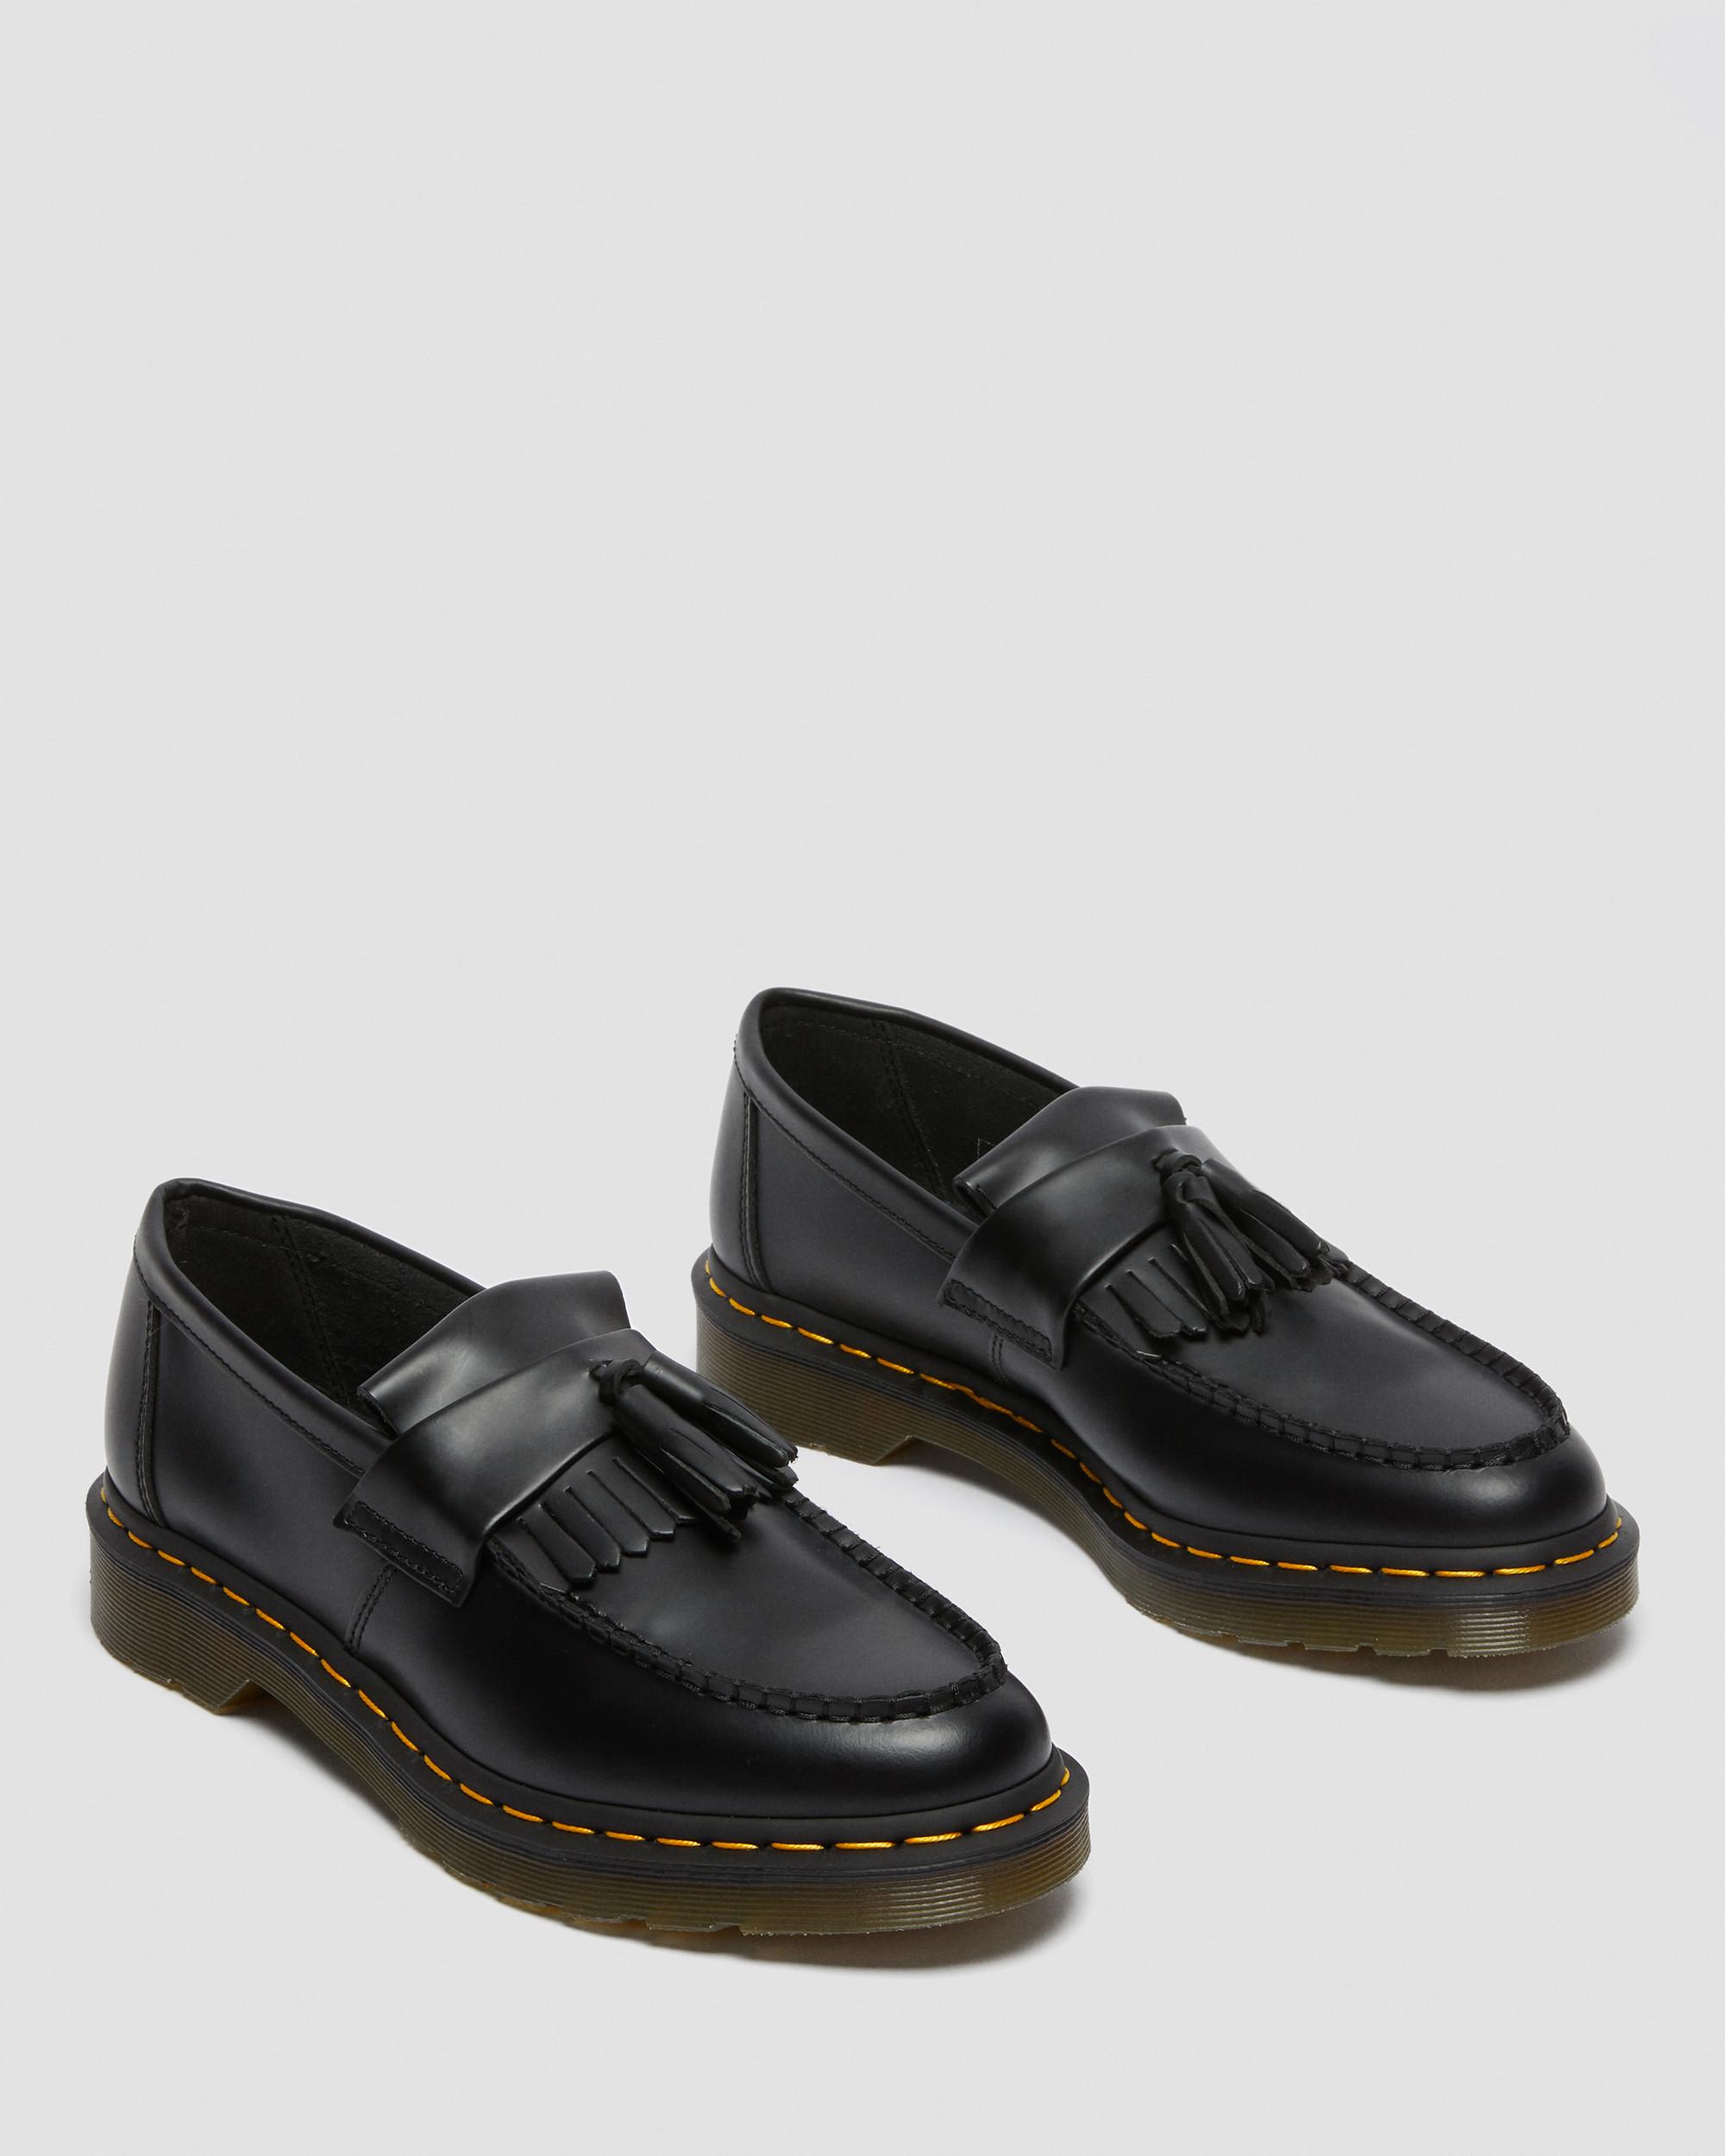 Mens Shoes Slip-on shoes Loafers Dr Martens Leather Adrian Ys Tassel Loafers in Black for Men 